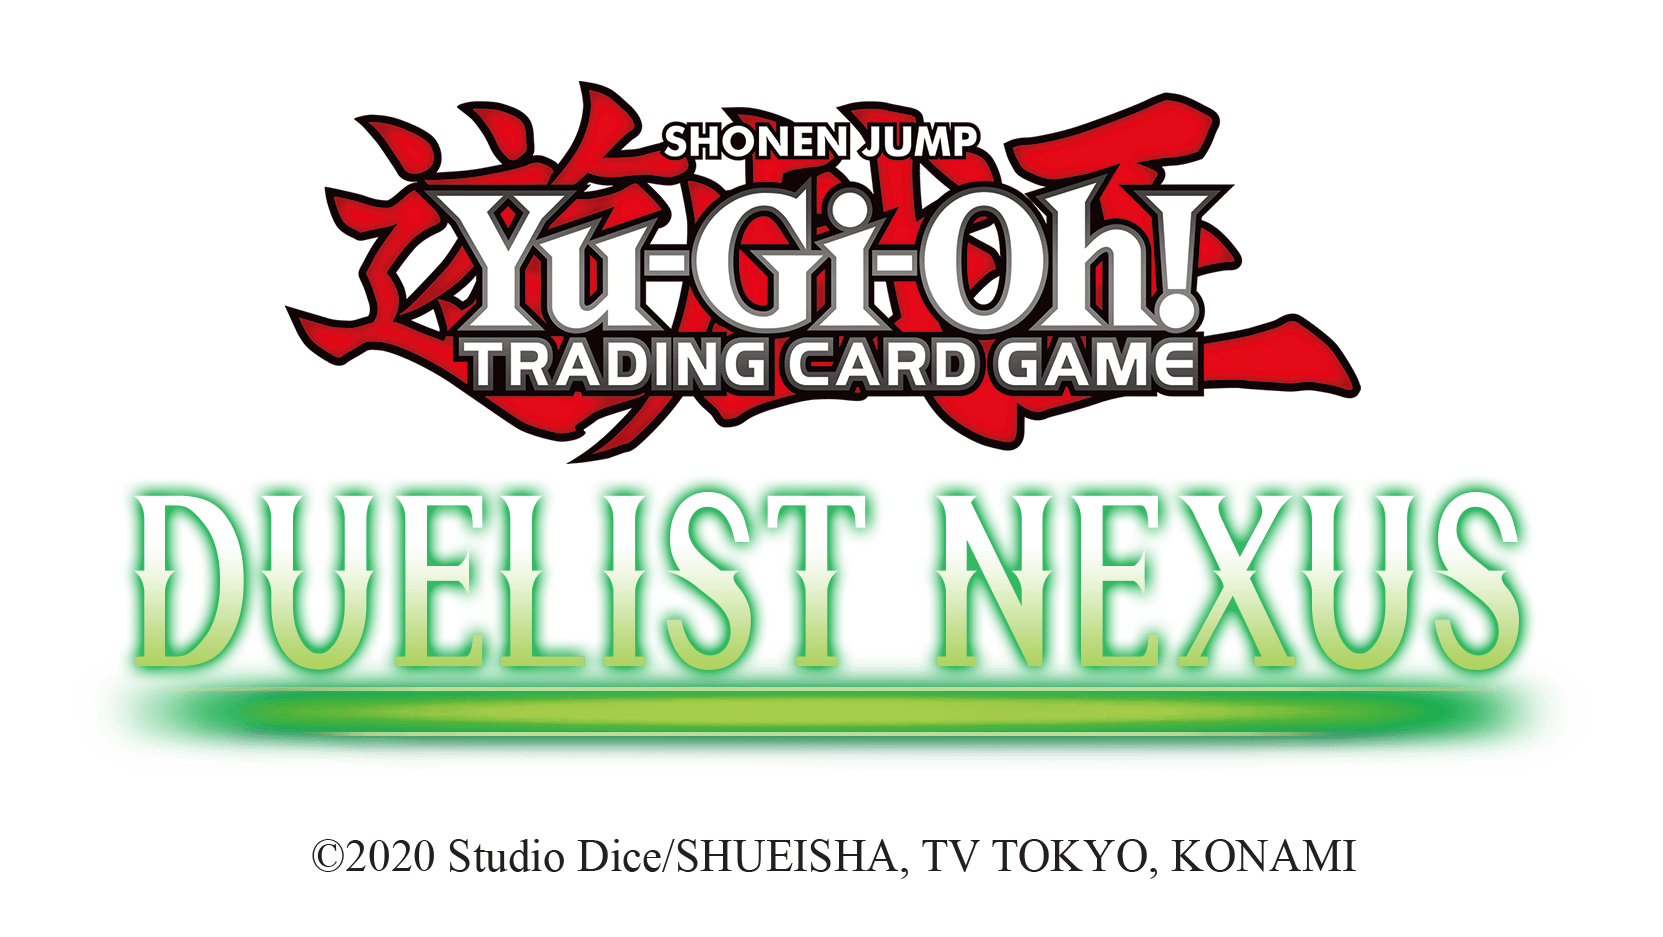 Yu-Gi-Oh! Hello to the Collection Card Game from 2017 to the First Monster Type Adding to this Burning!